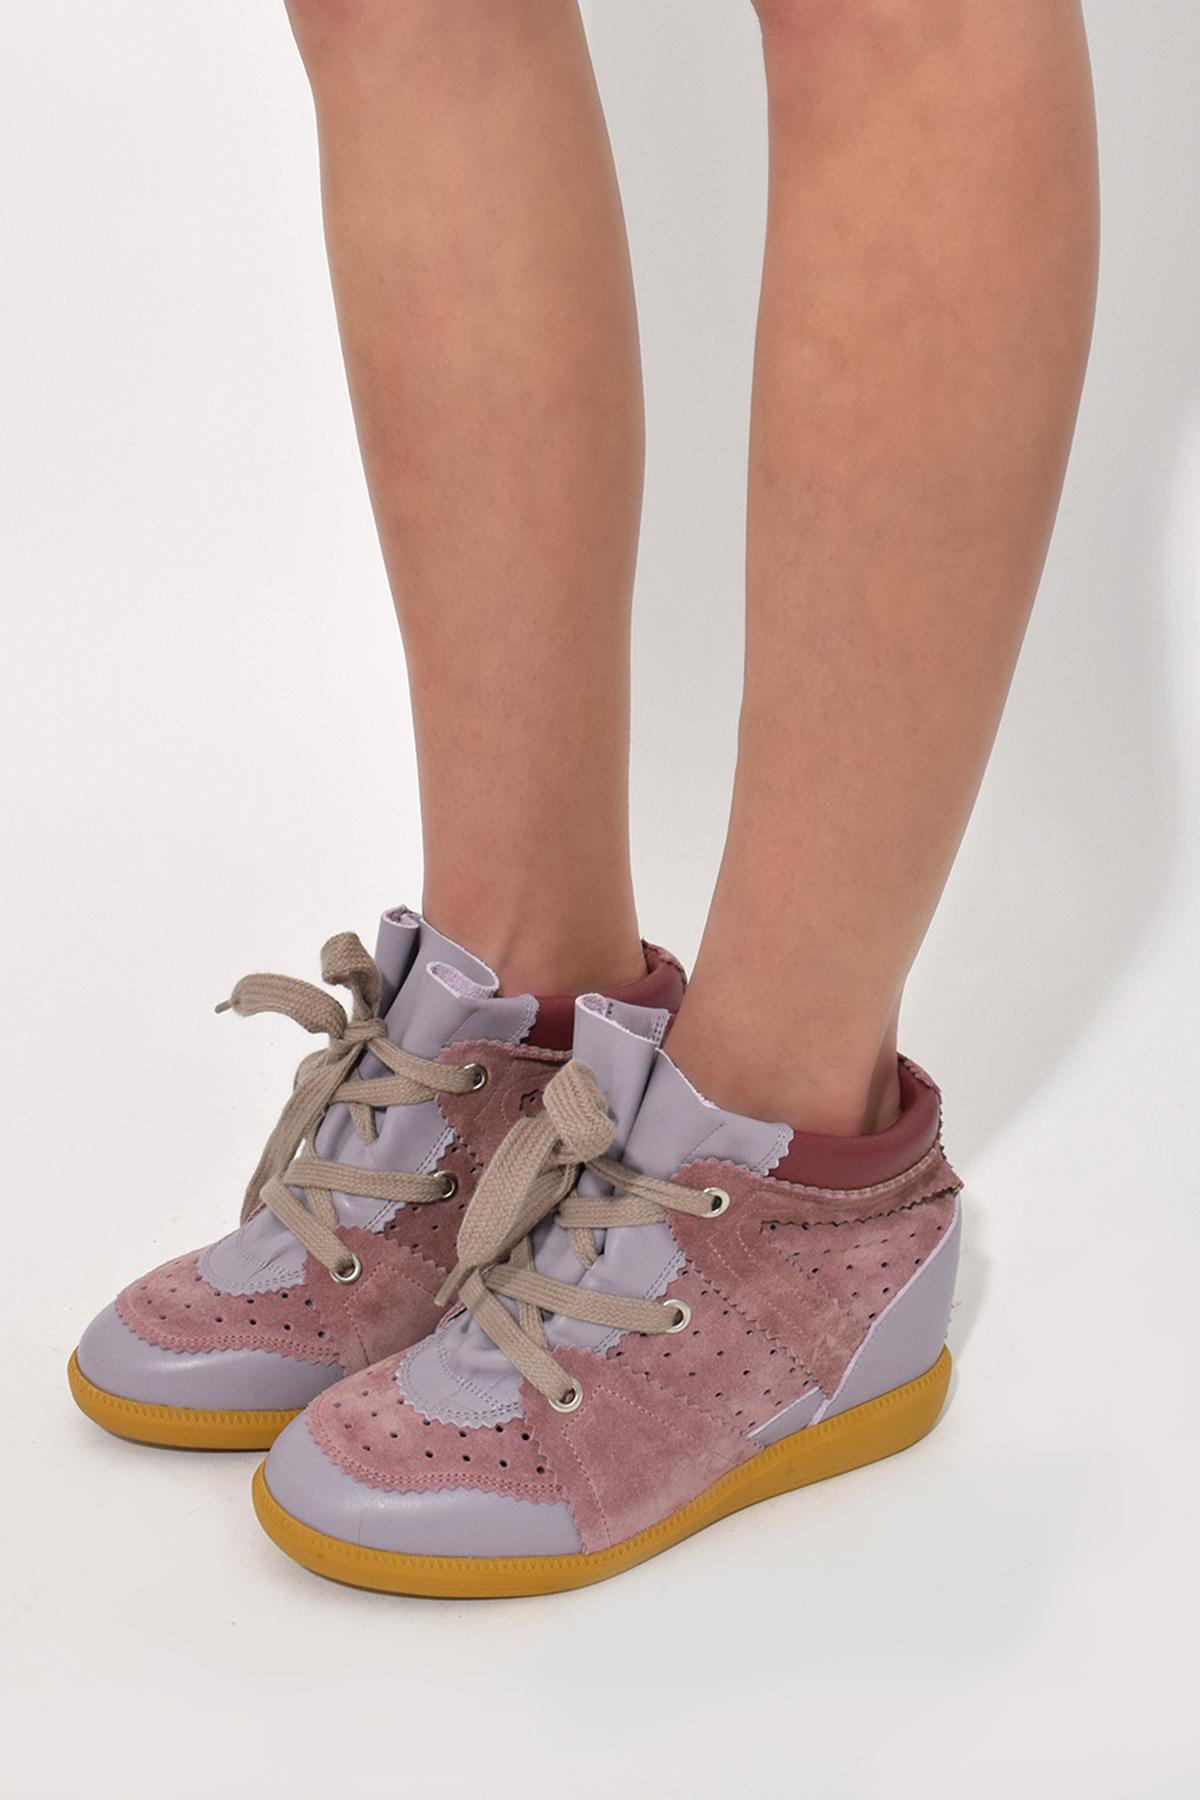 isabel marant betty sneakers,Quality assurance,protein-burger.com